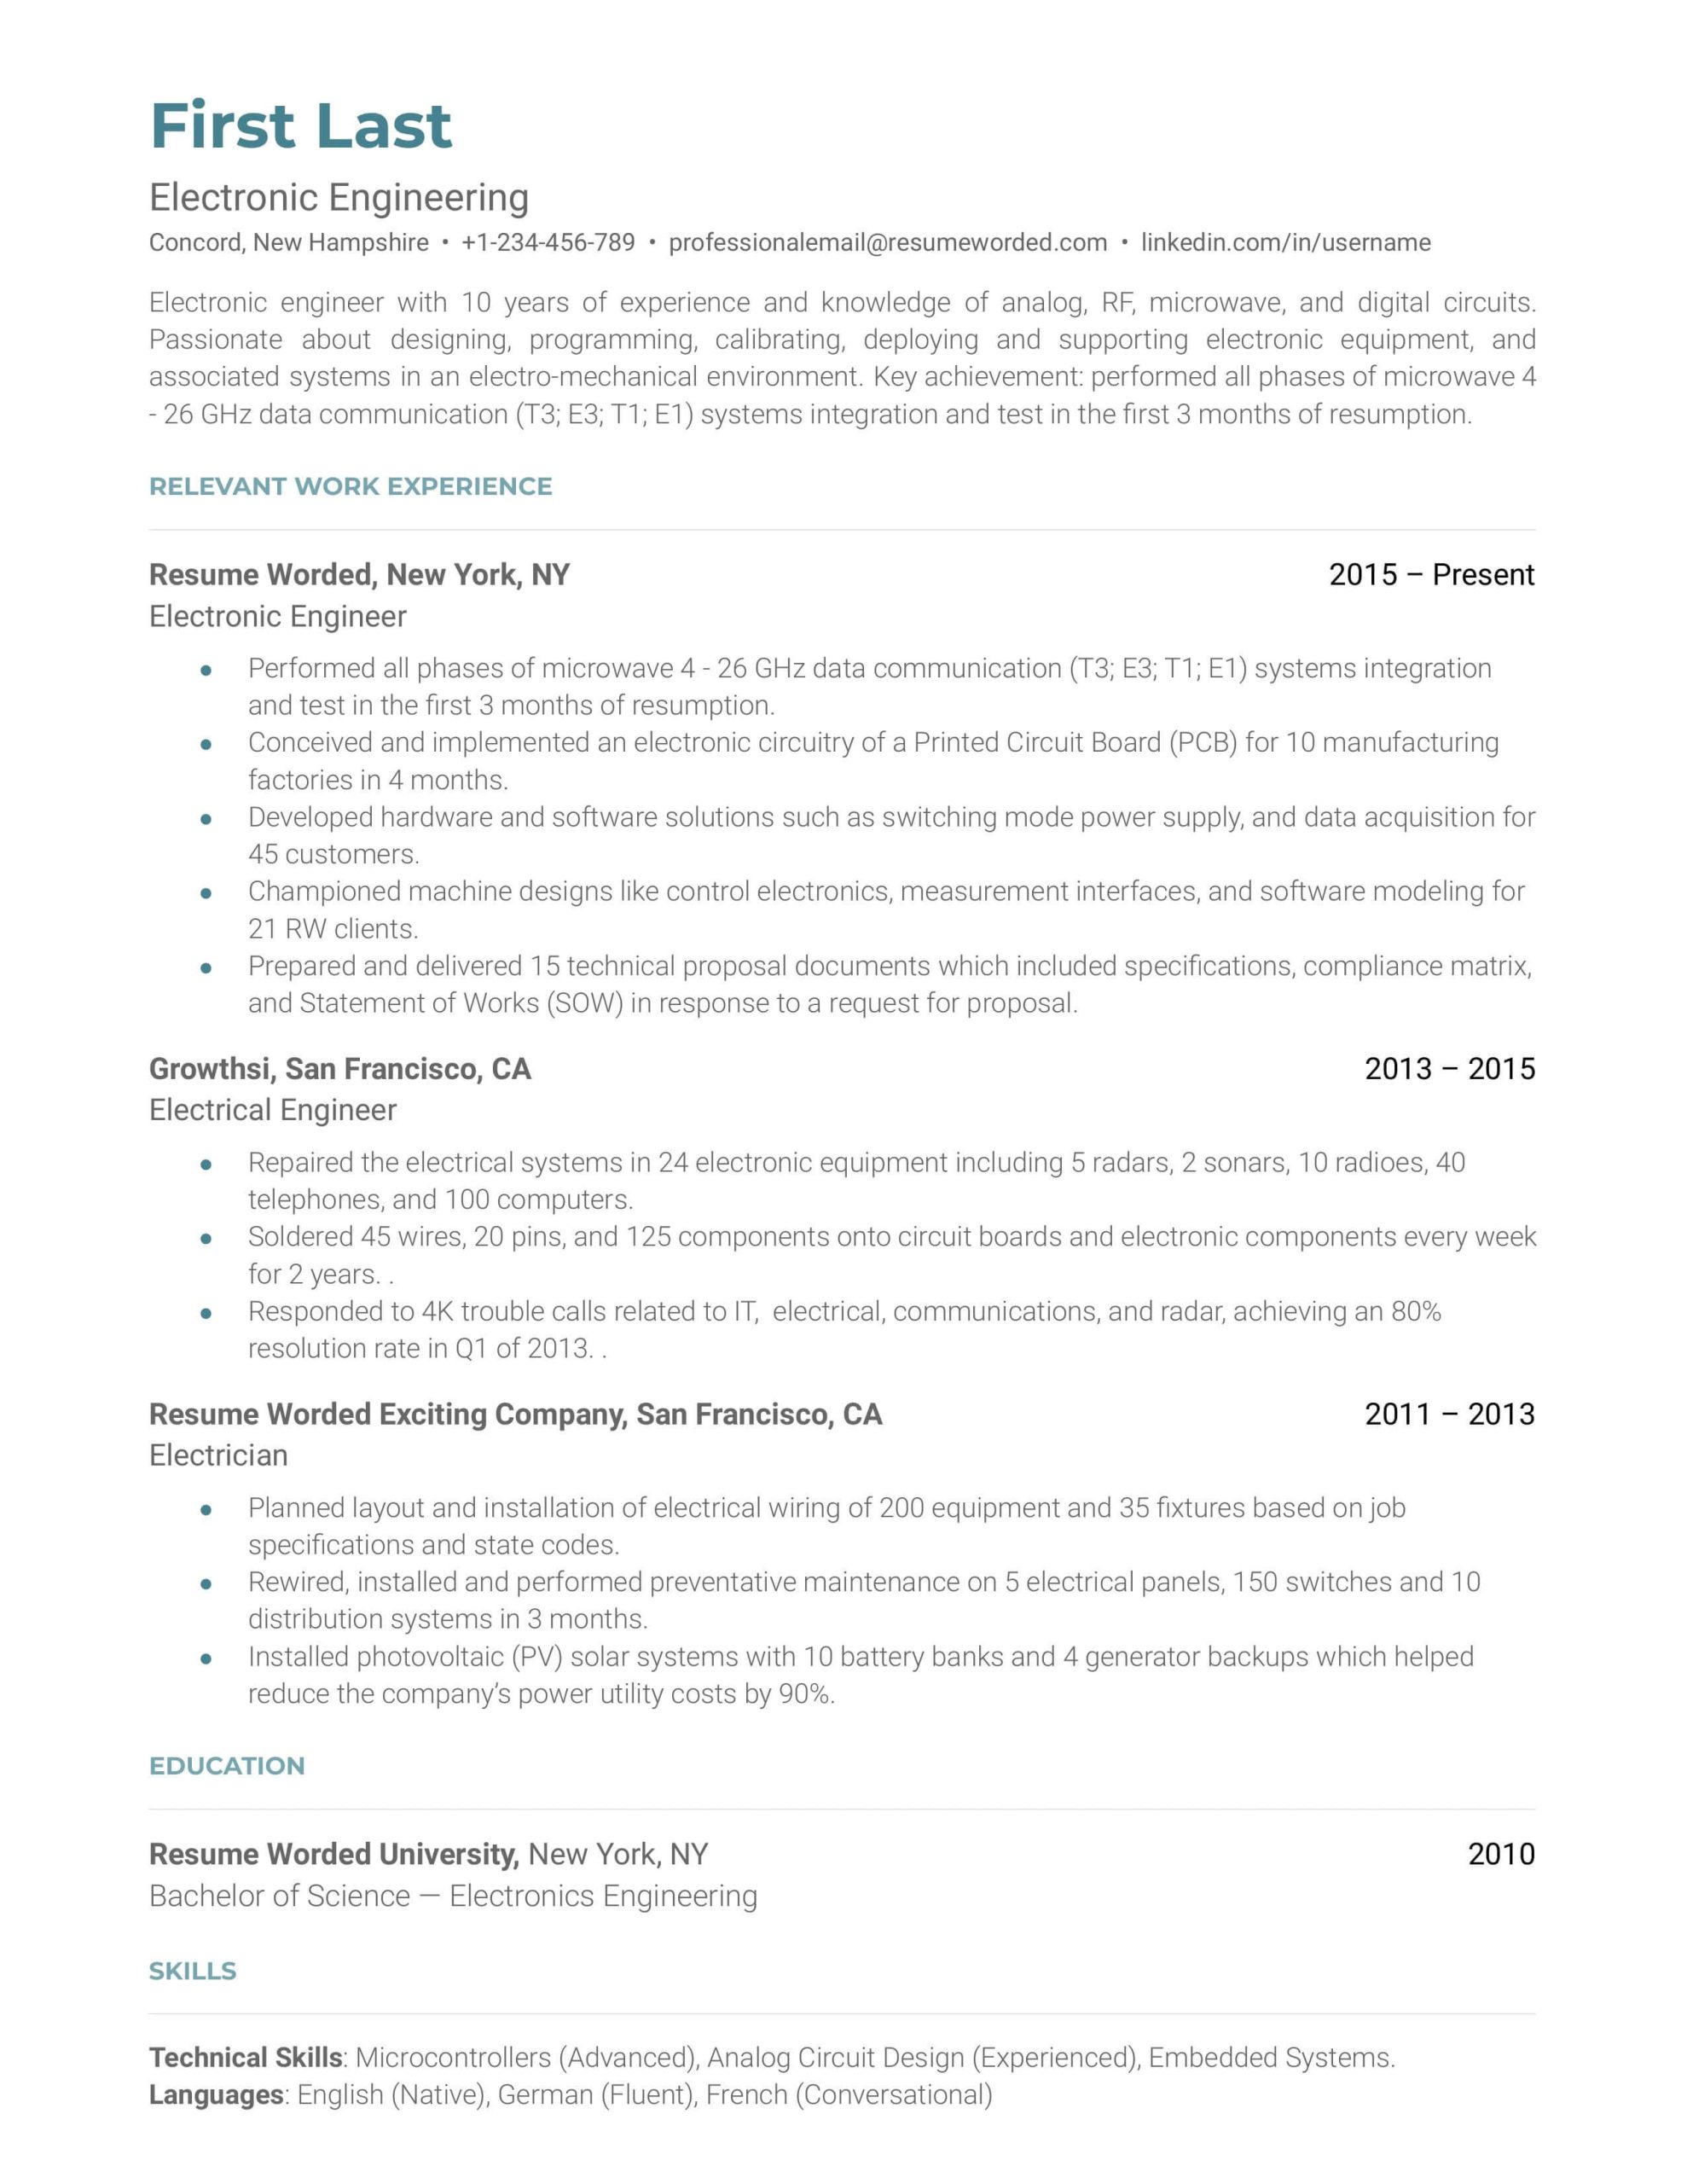 Sample Resume for Experienced Power Electronics Engineer Electronic Engineering Resume Example for 2022 Resume Worded